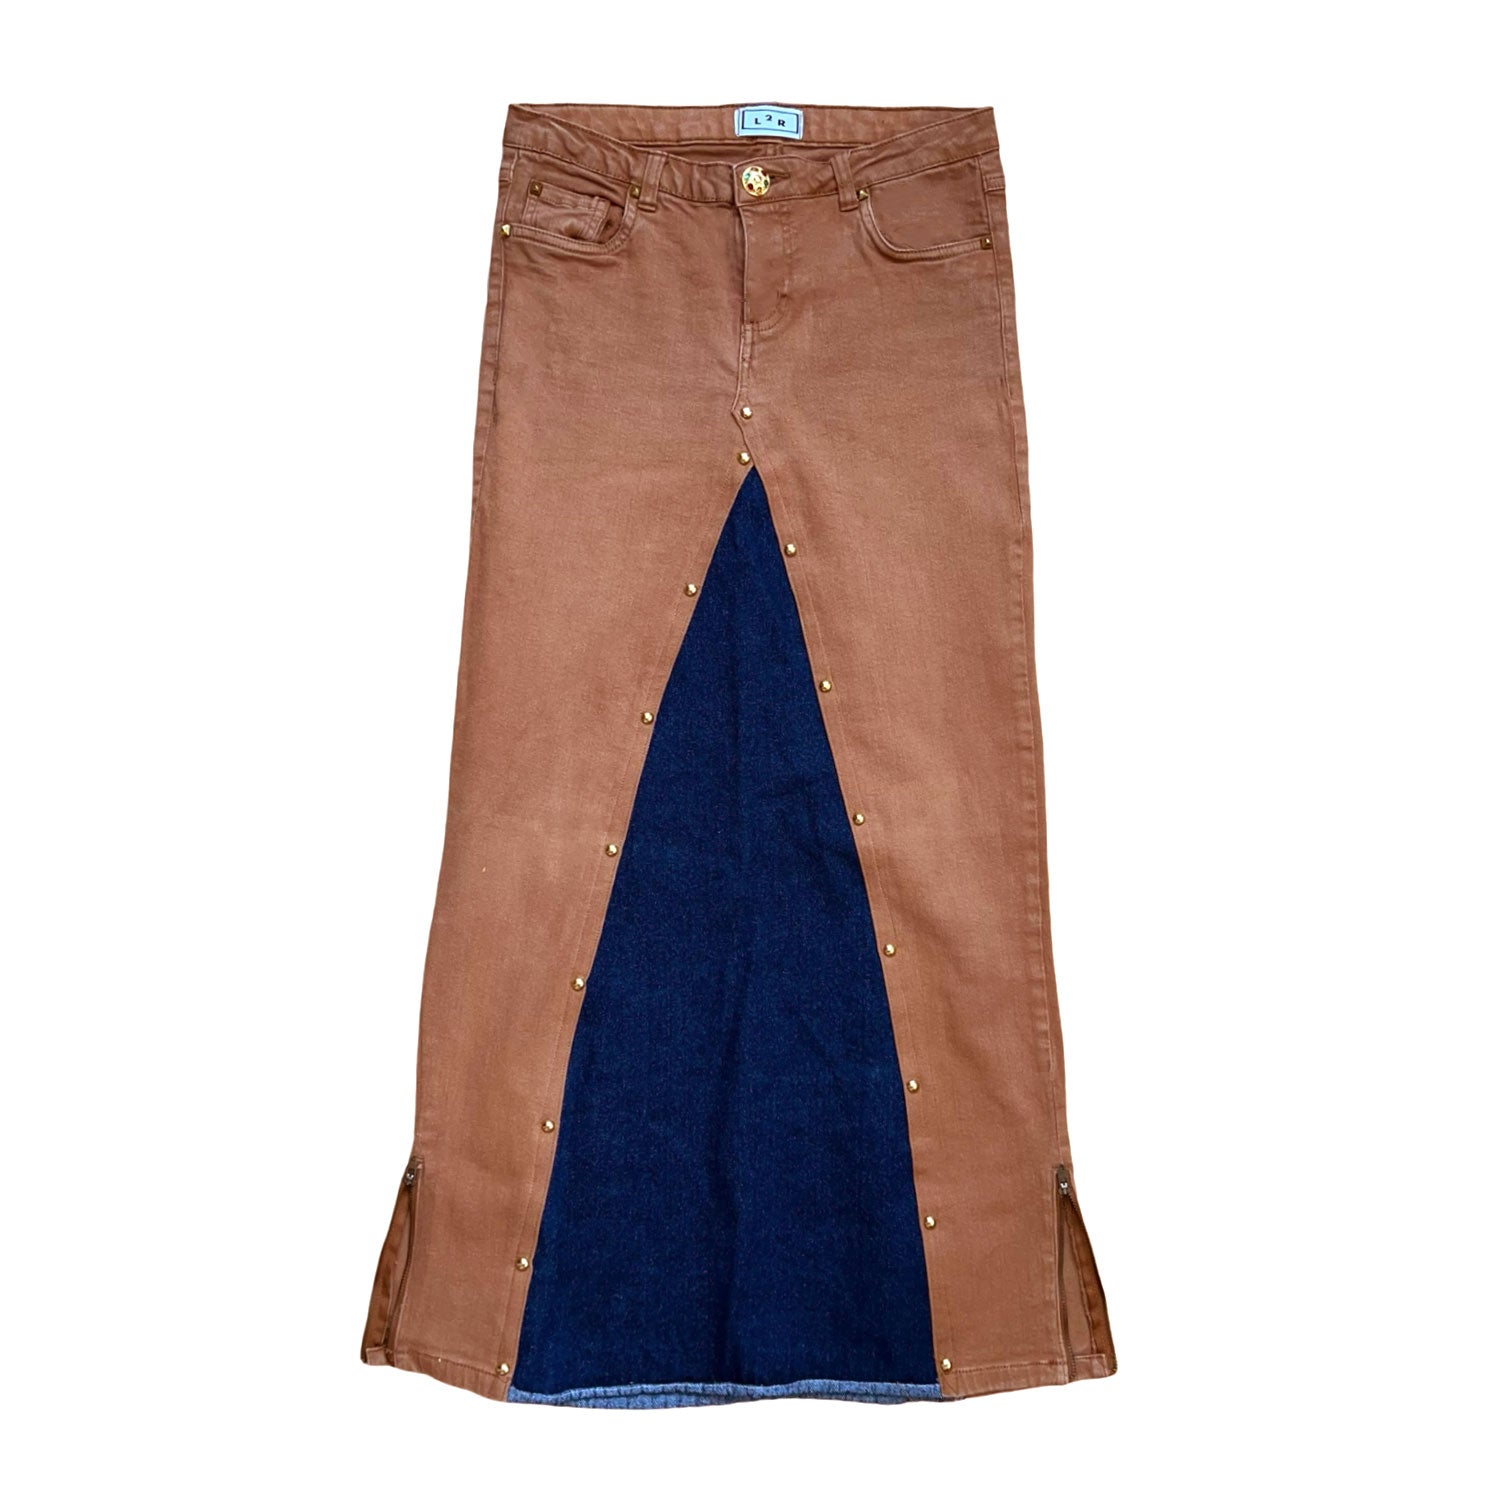 Maxi Denim Skirt in Brown and Blue